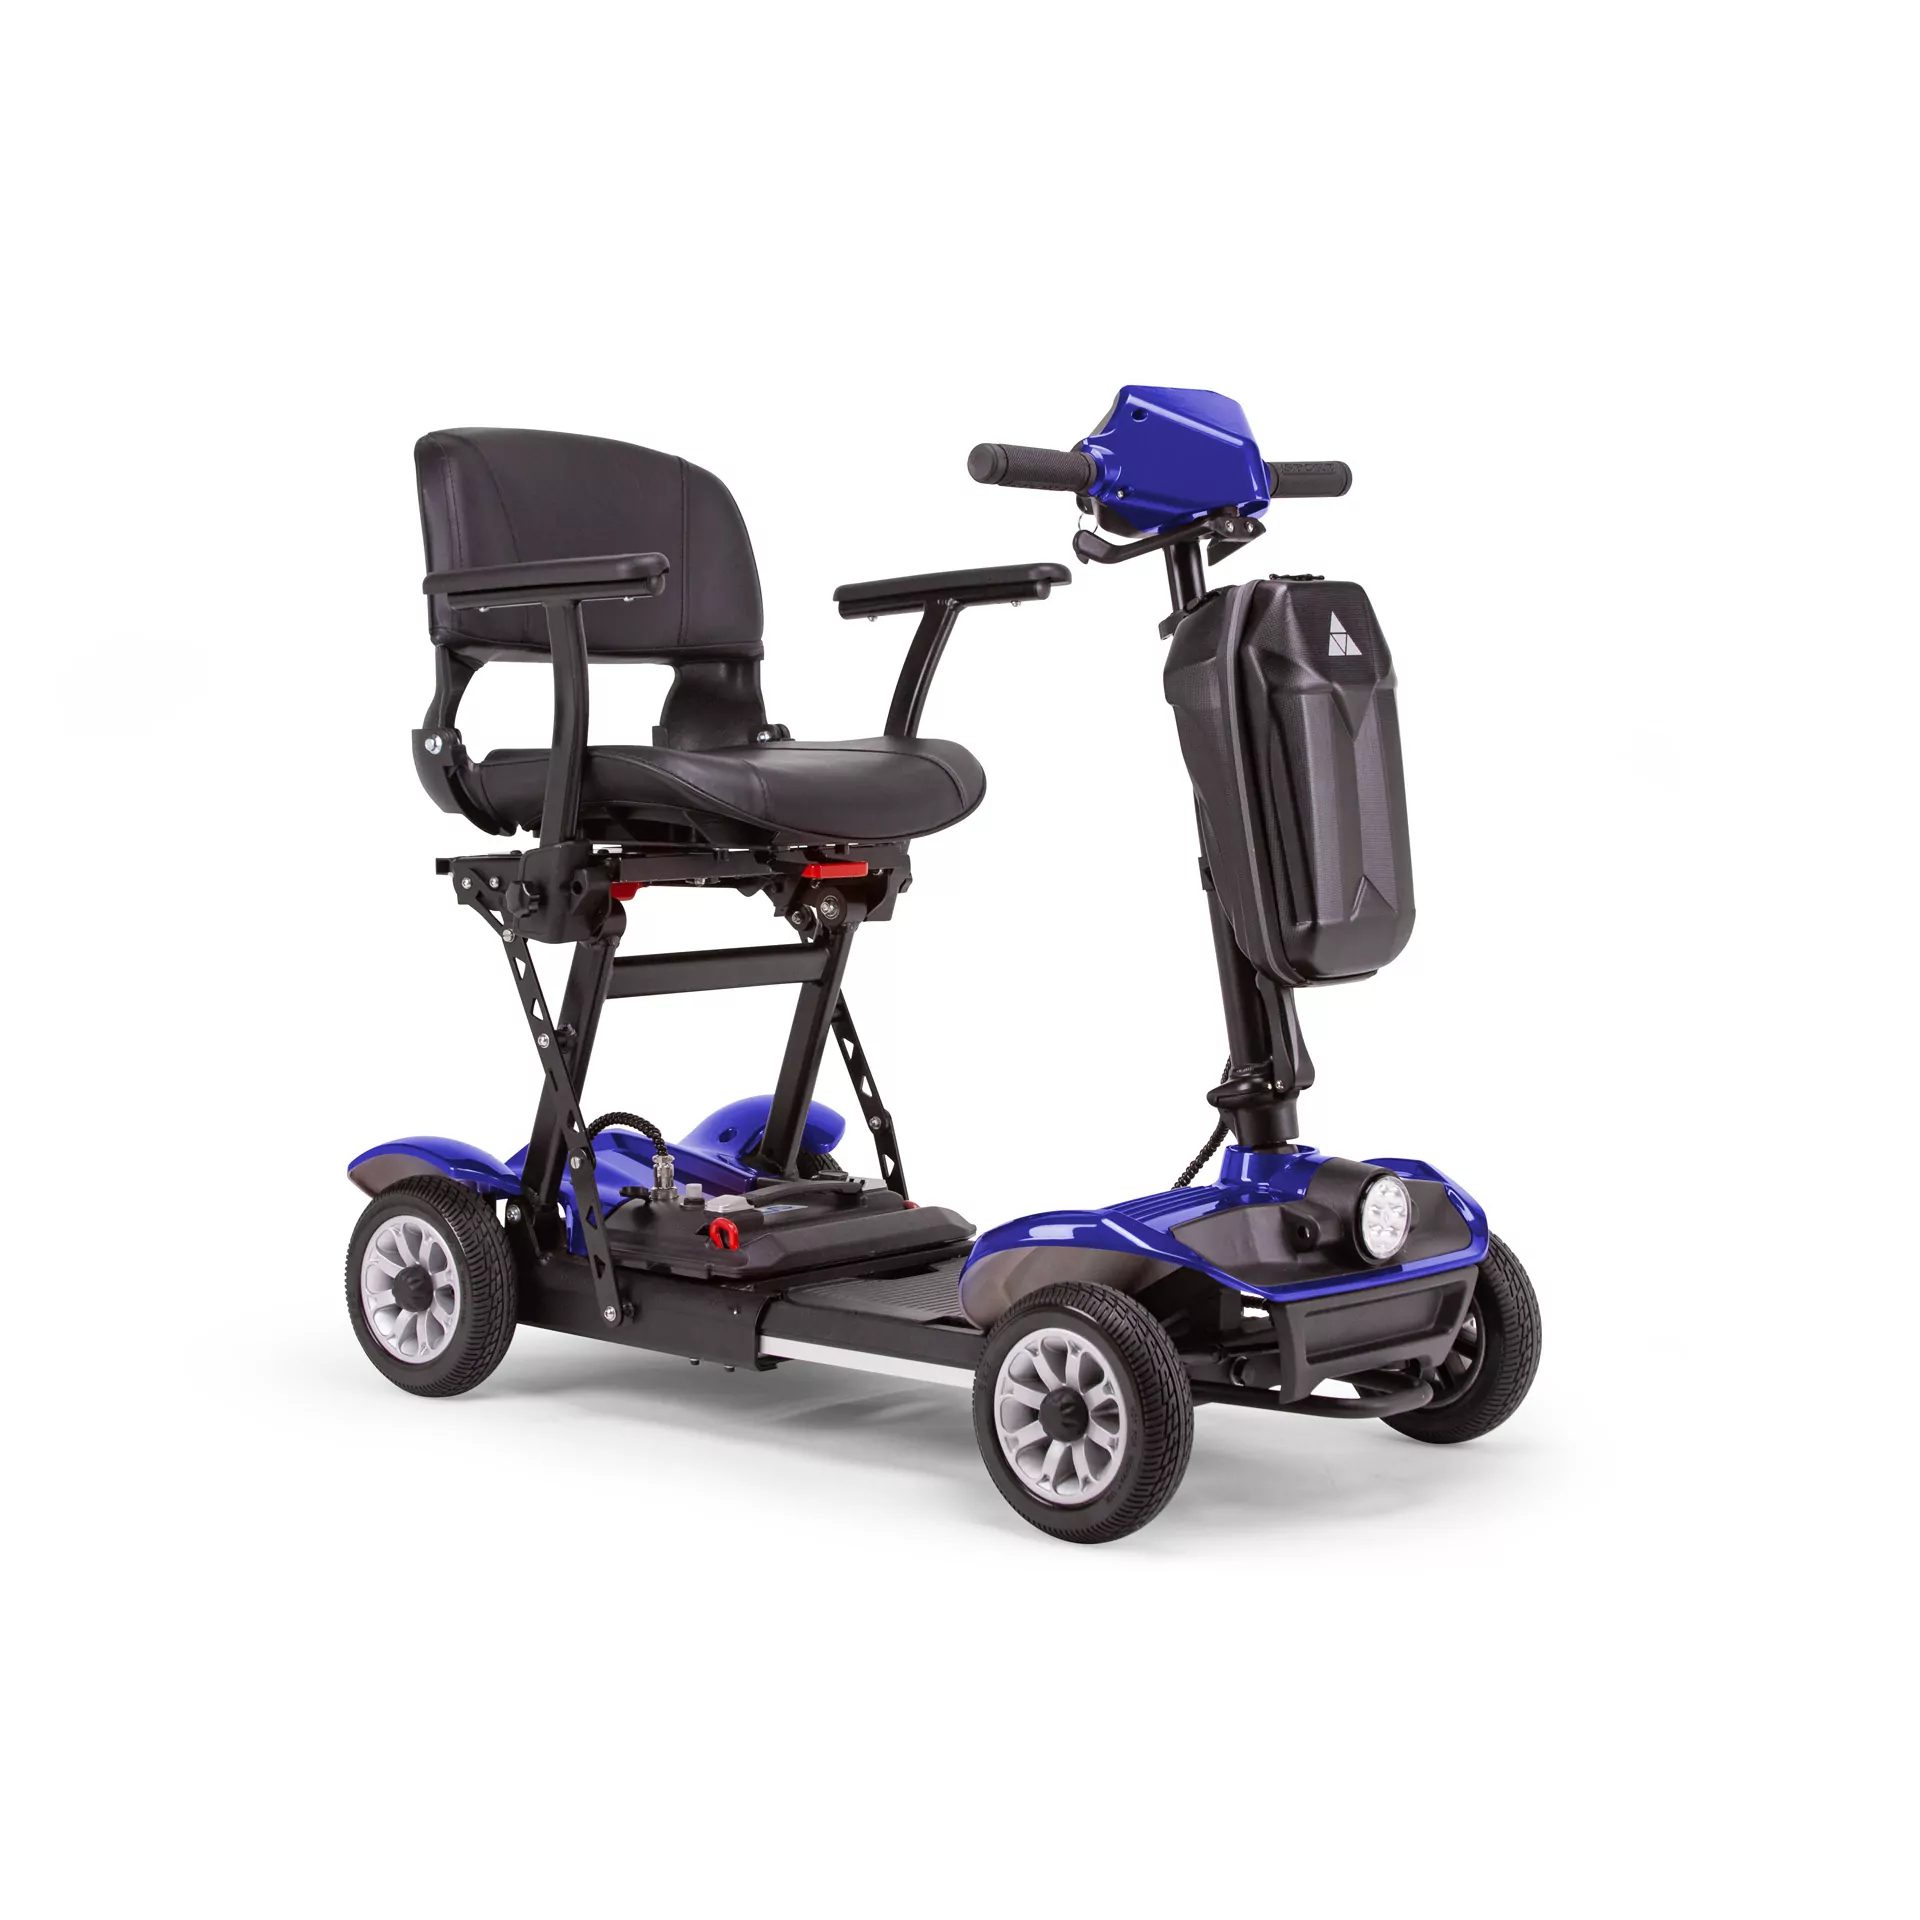 Ewheels Electric Mobility Scooters Online Store.